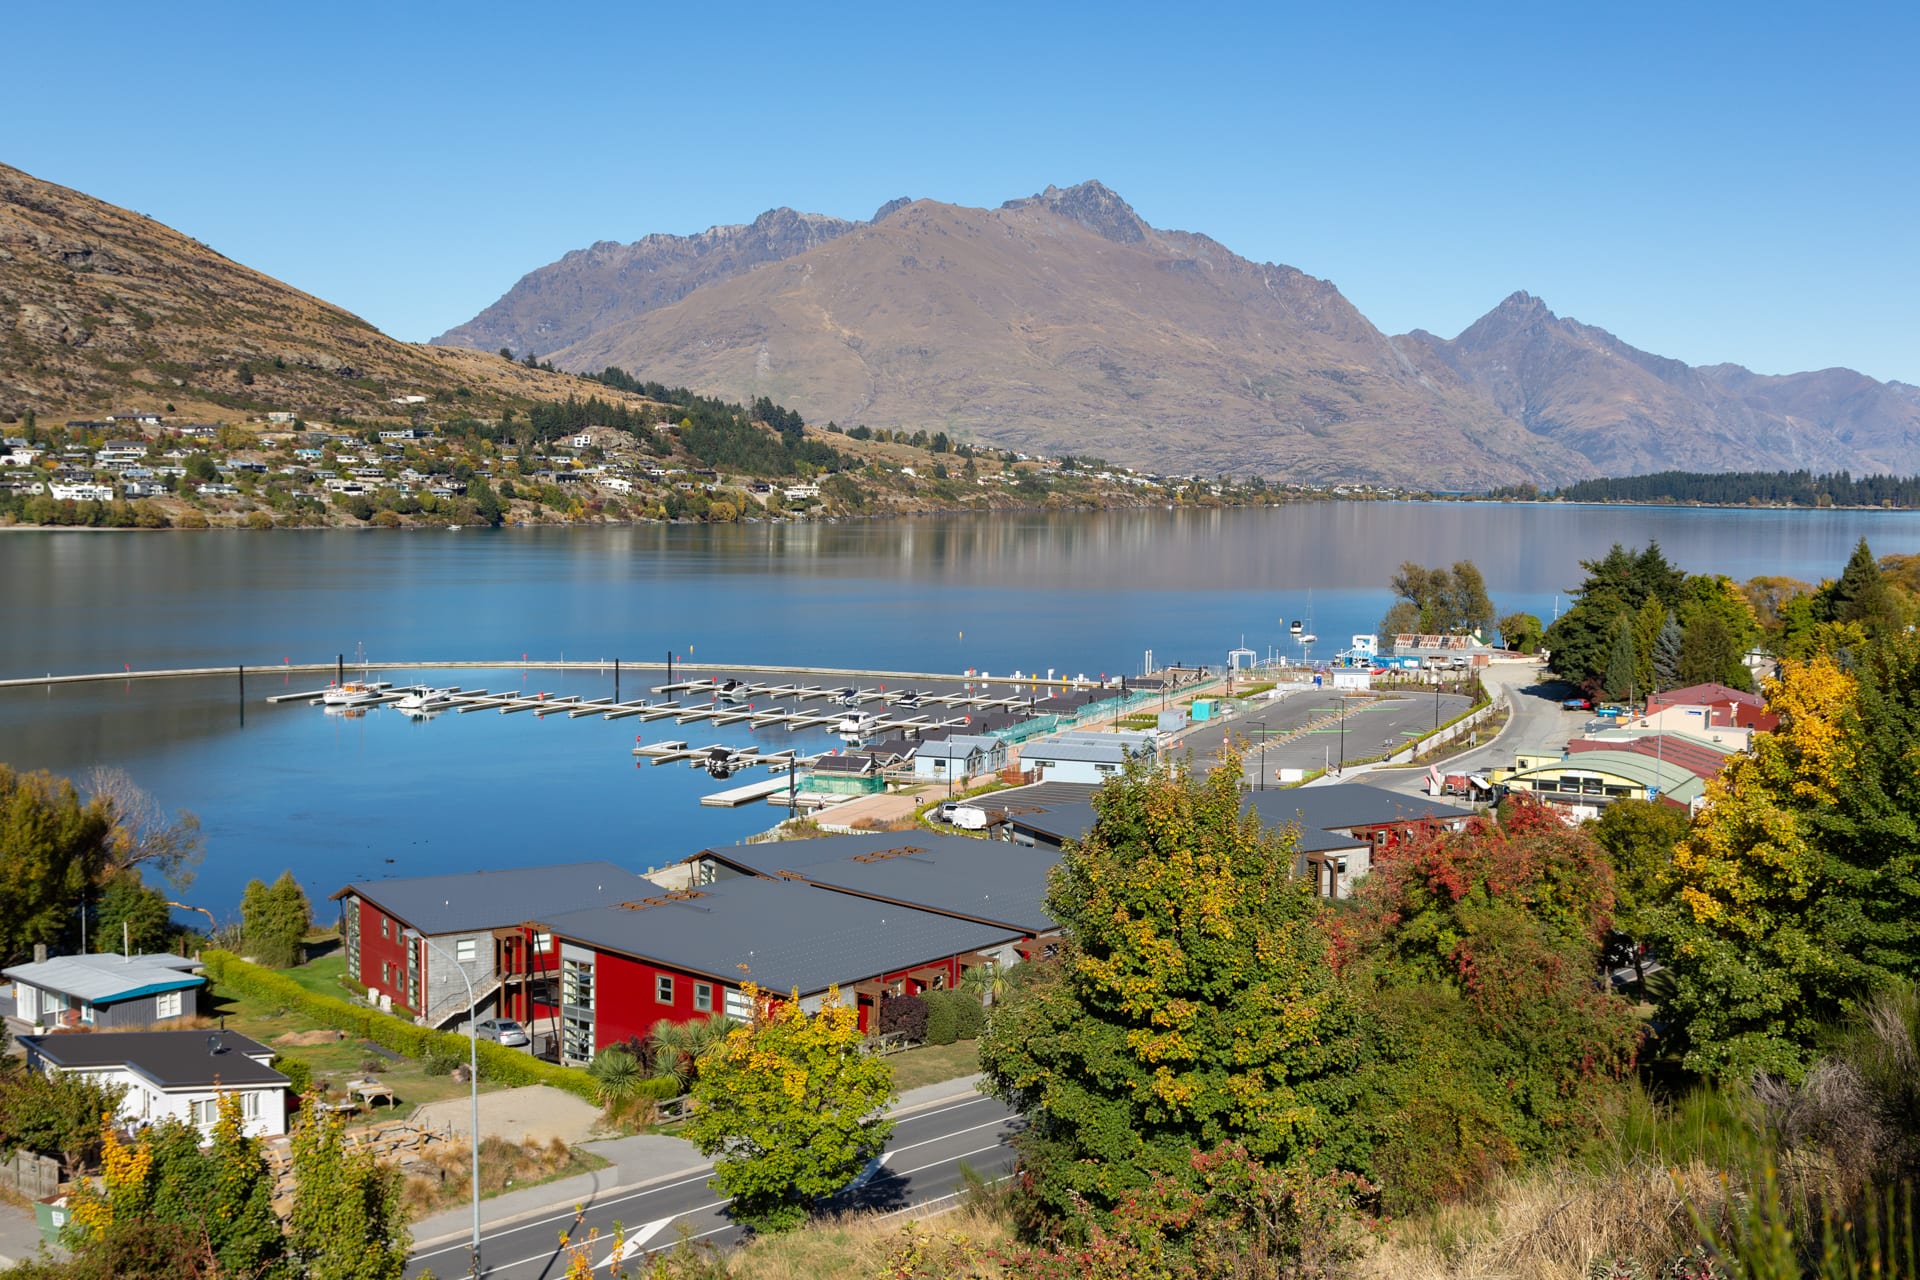 Located at the Queenstown marina